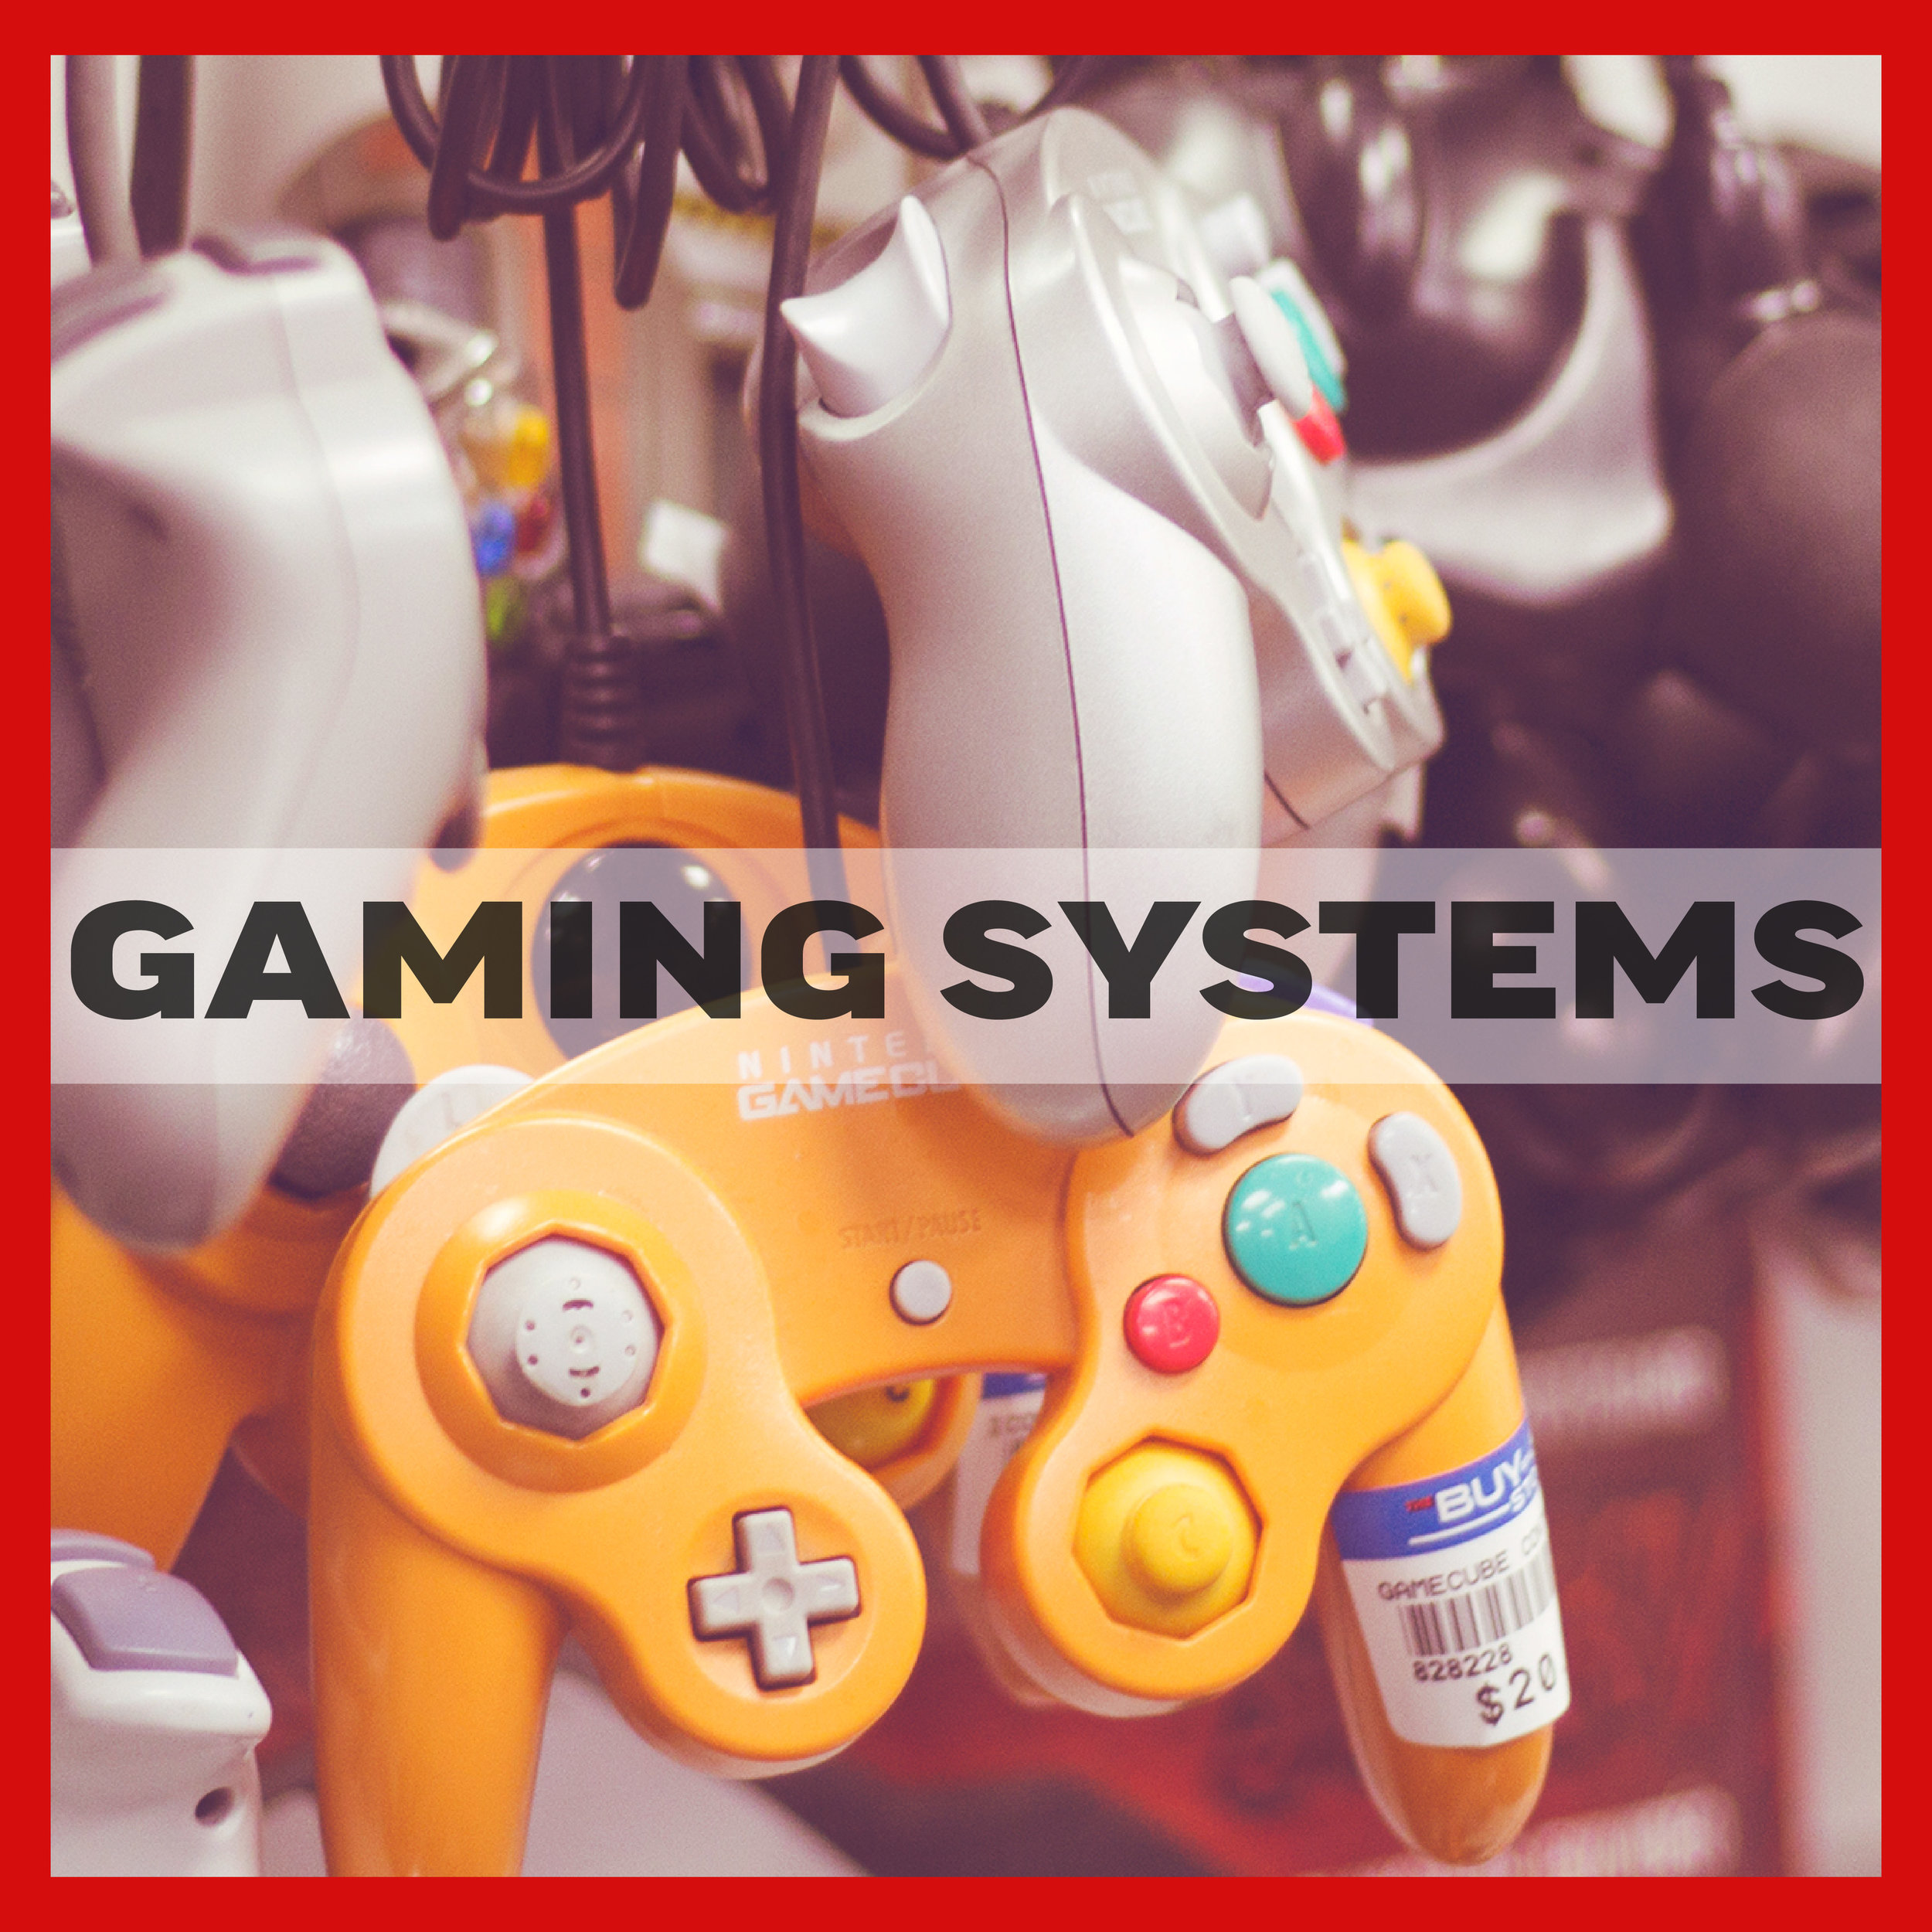 Gaming Systems